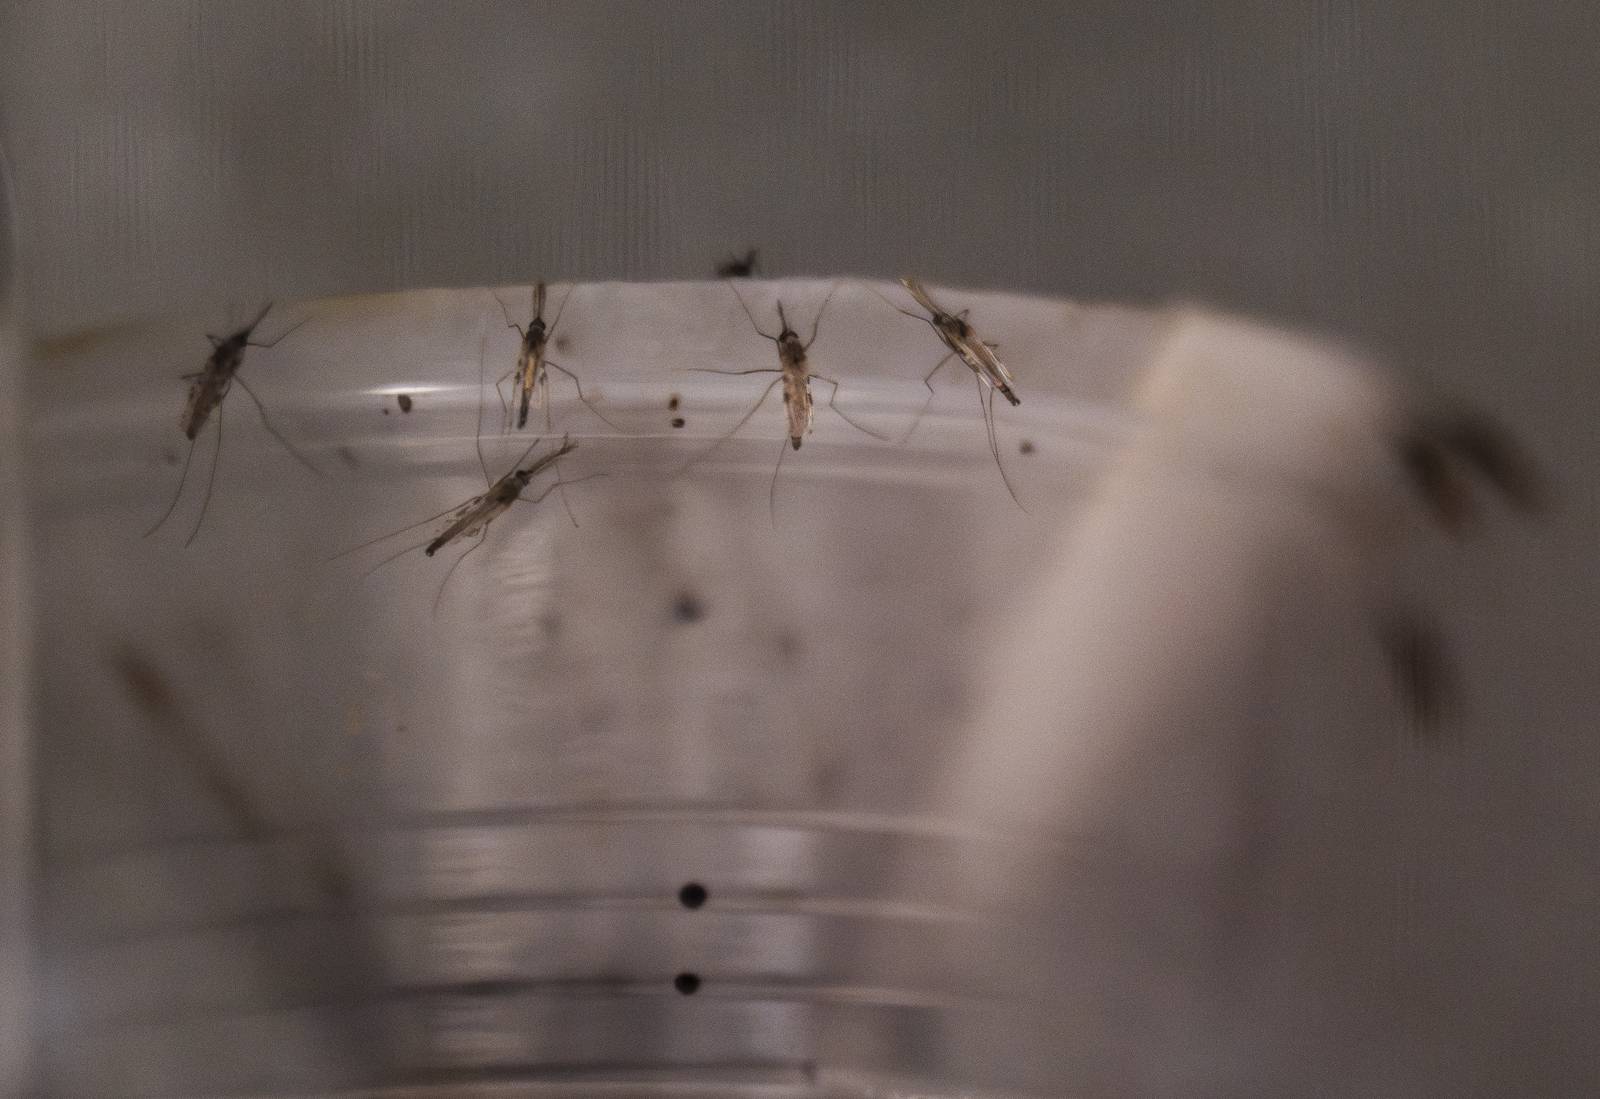 Mosquitos at the Johns Hopkins Bloomberg School of Public Health Malaria Research Institute Insectary.